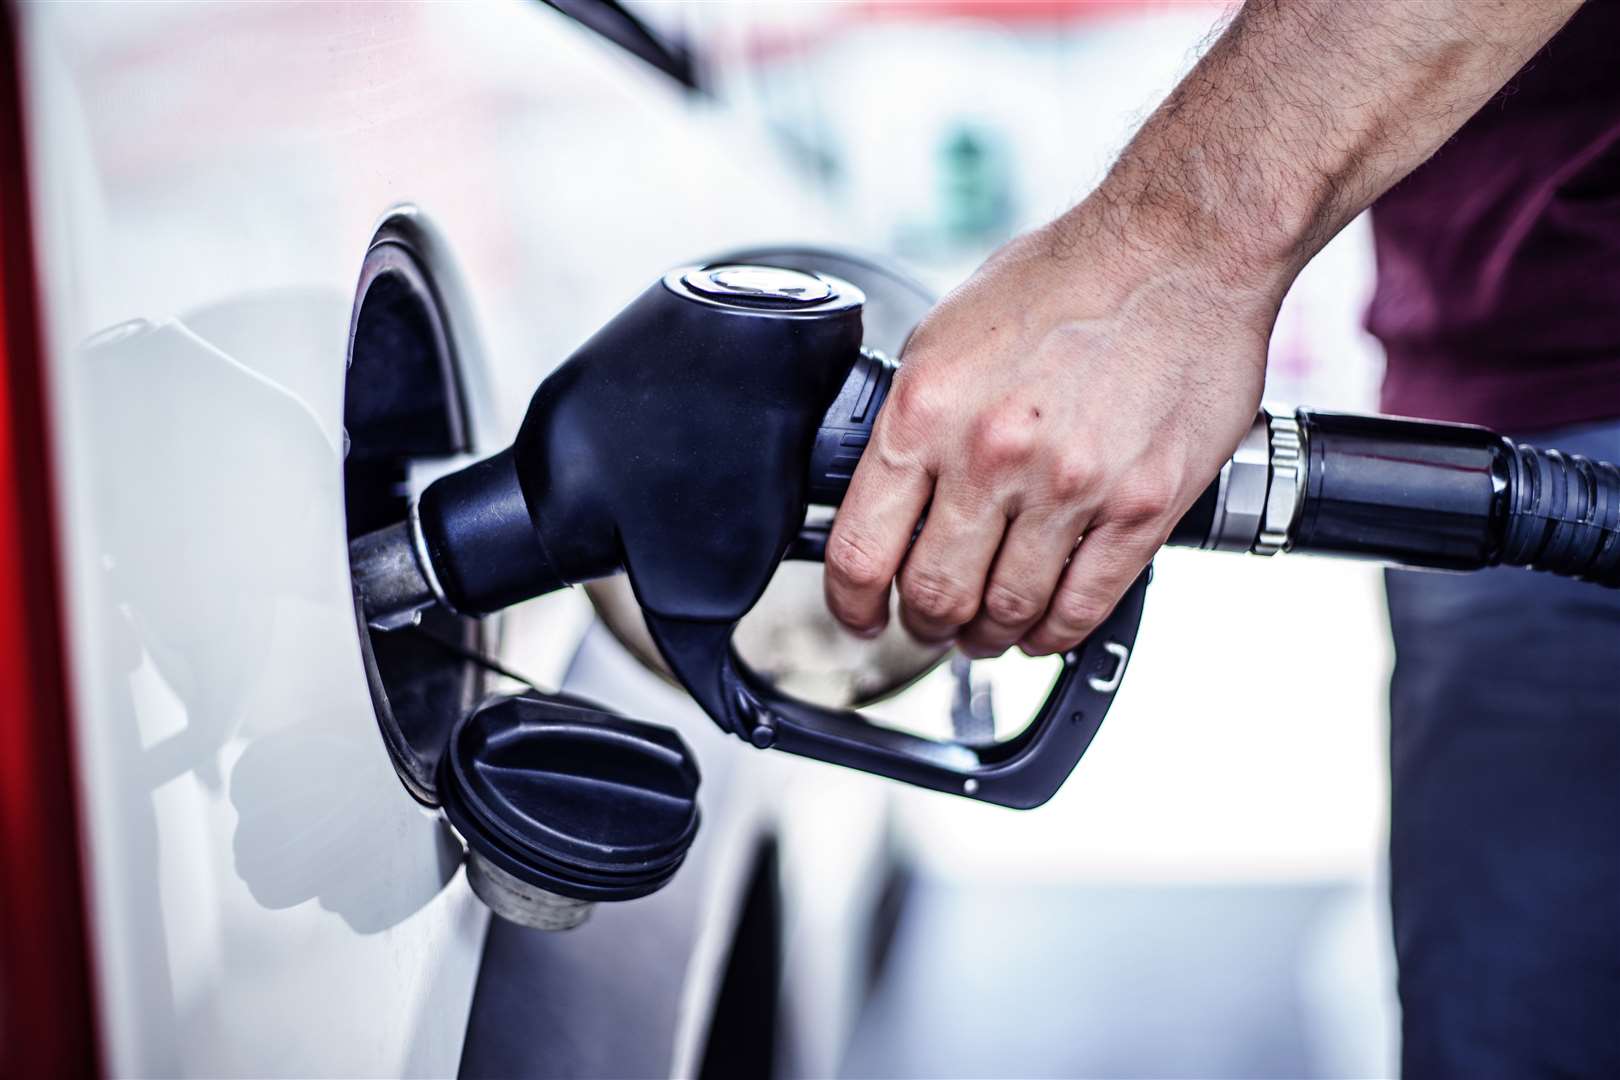 Drivers of diesel cars are paying too much for fuel says the RAC. Image: Stock photo.